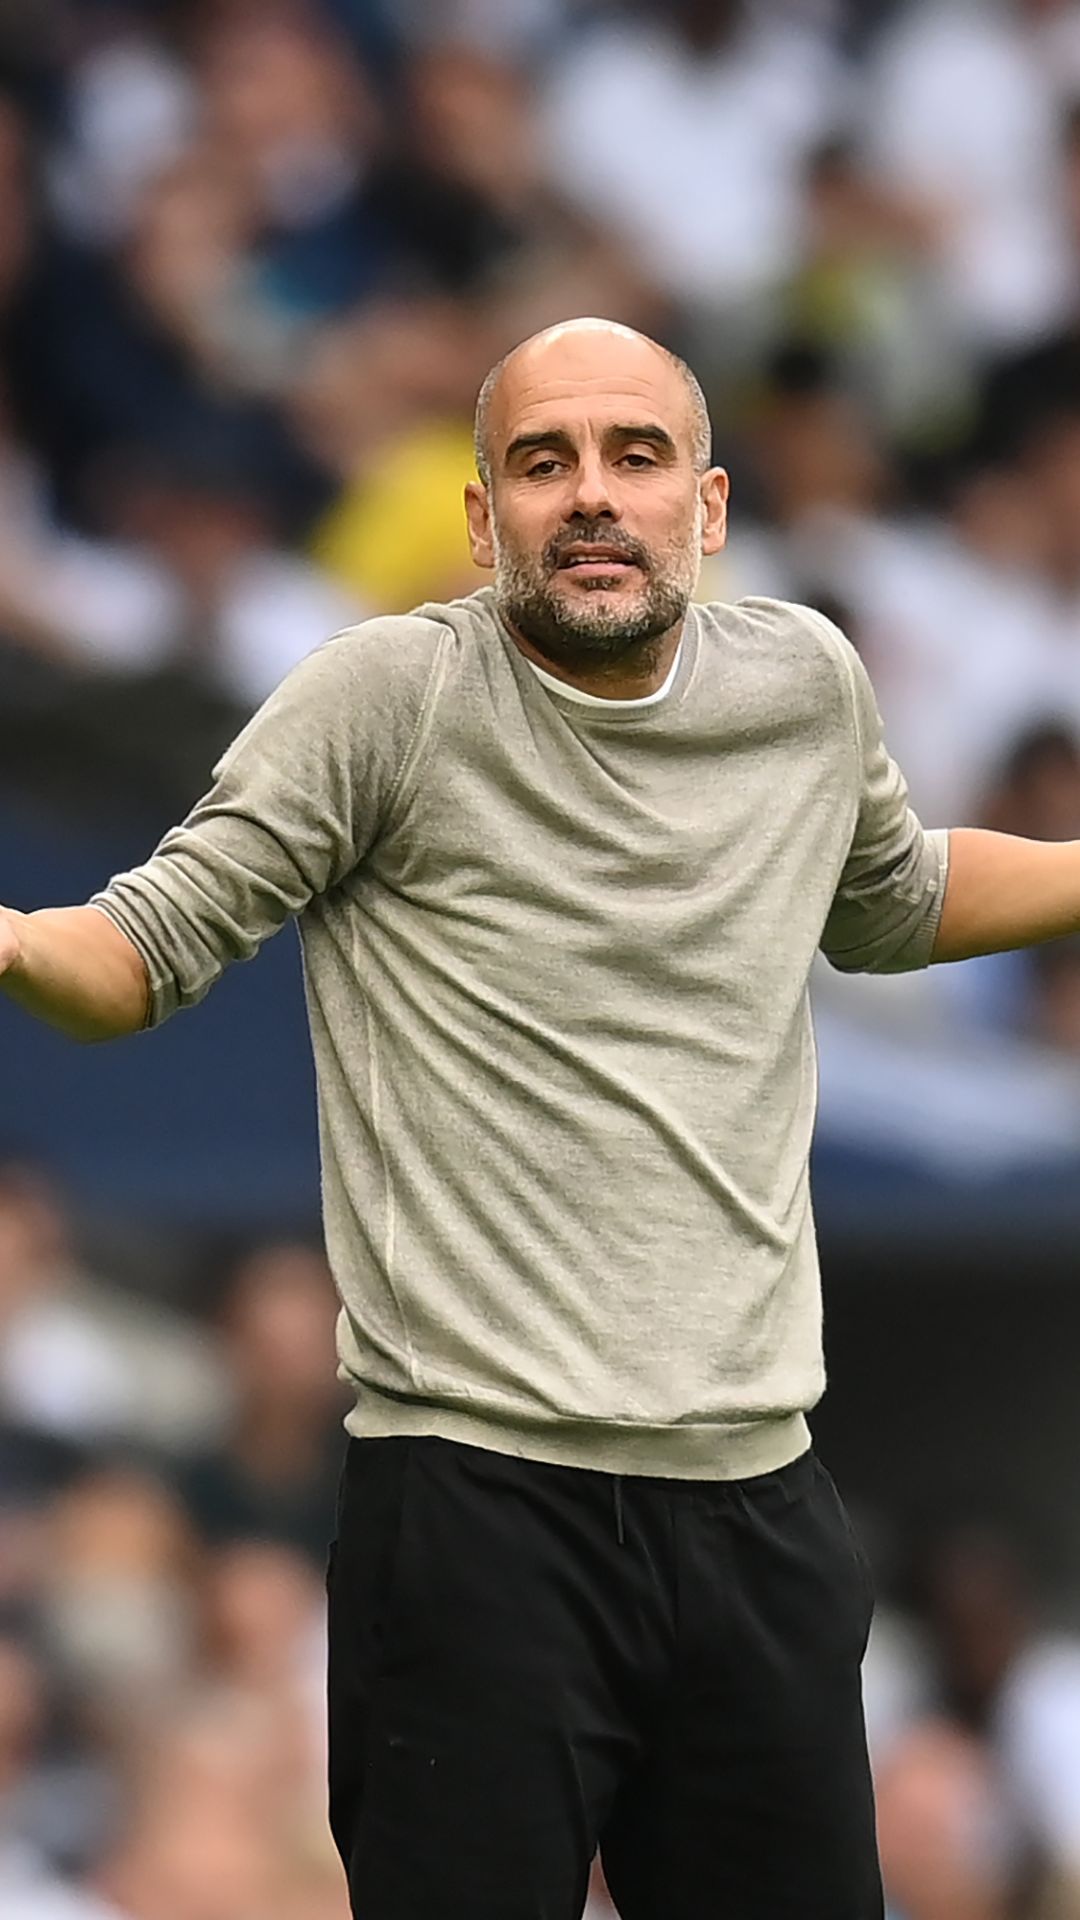 UCL 2022-23: Manchester City Possible Playing XI against Real Madrid, Kyle Walker against Vinicius Jr